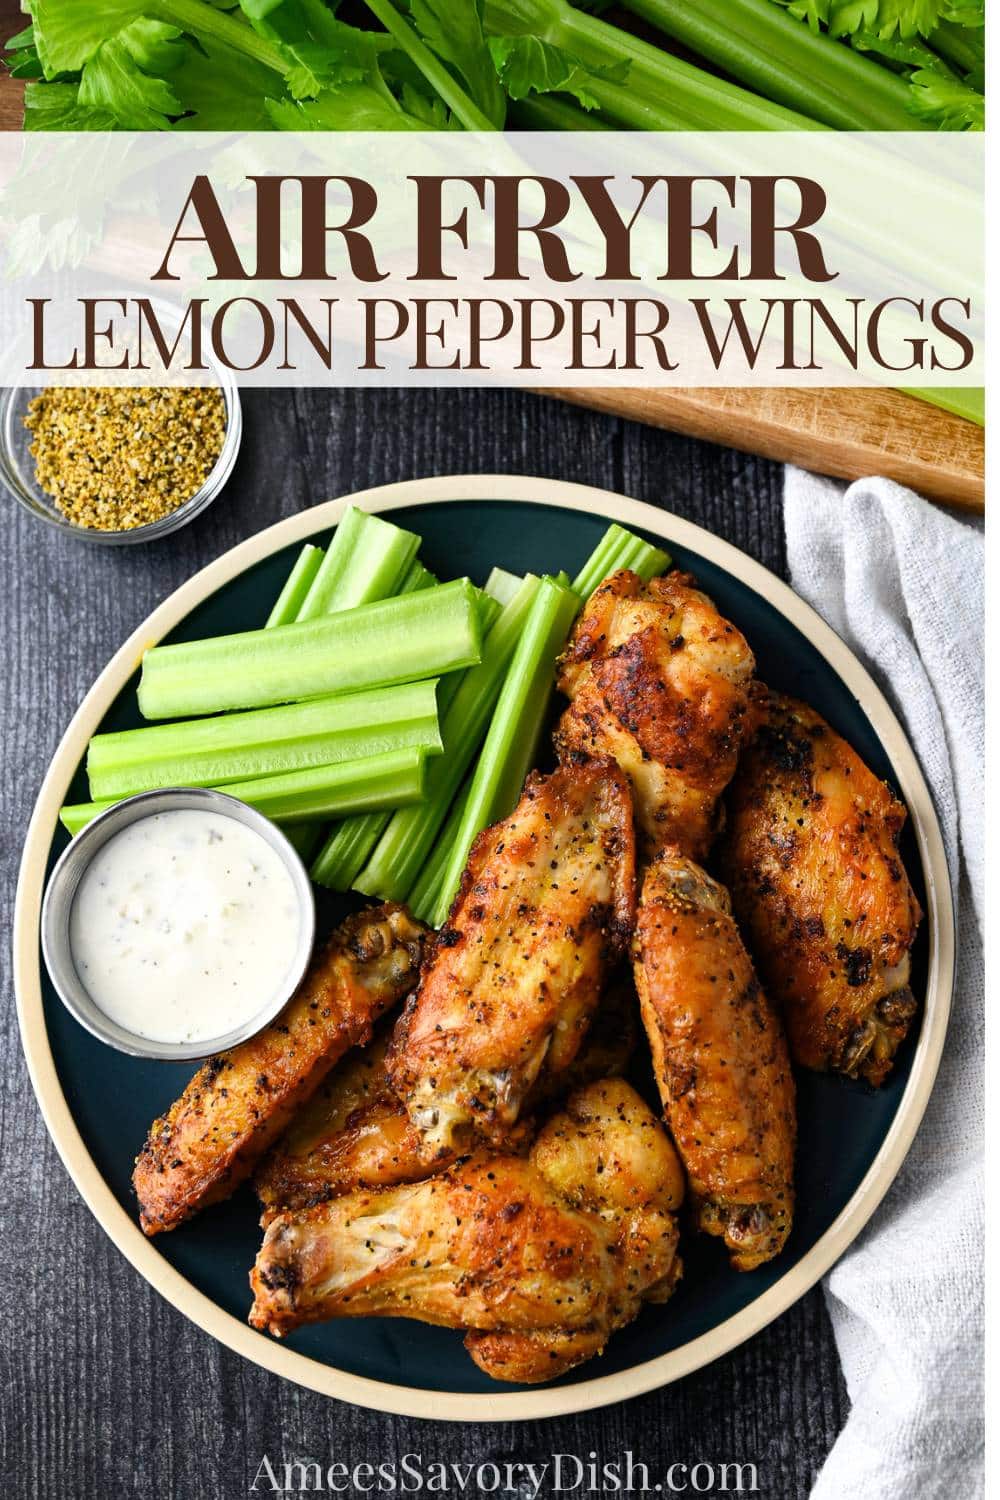 With four ingredients and less than 30 minutes, you have everything you need for crisp and juicy air fryer lemon pepper wings with irresistible flavor. via @Ameessavorydish